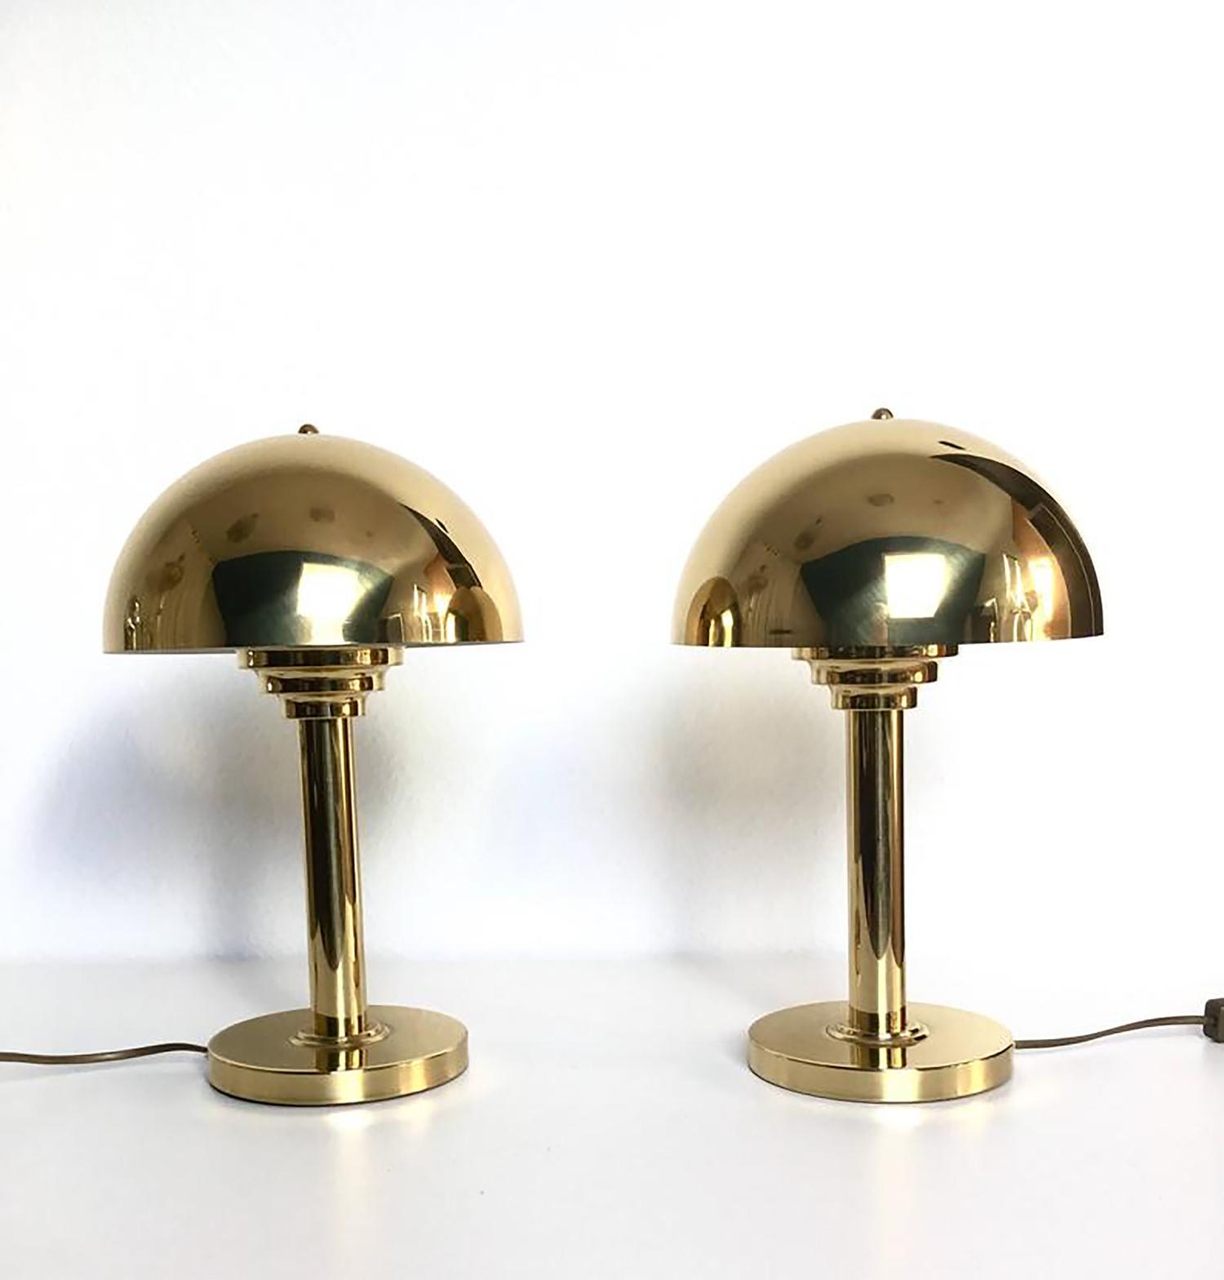 Pair of Mid century modern table lamps